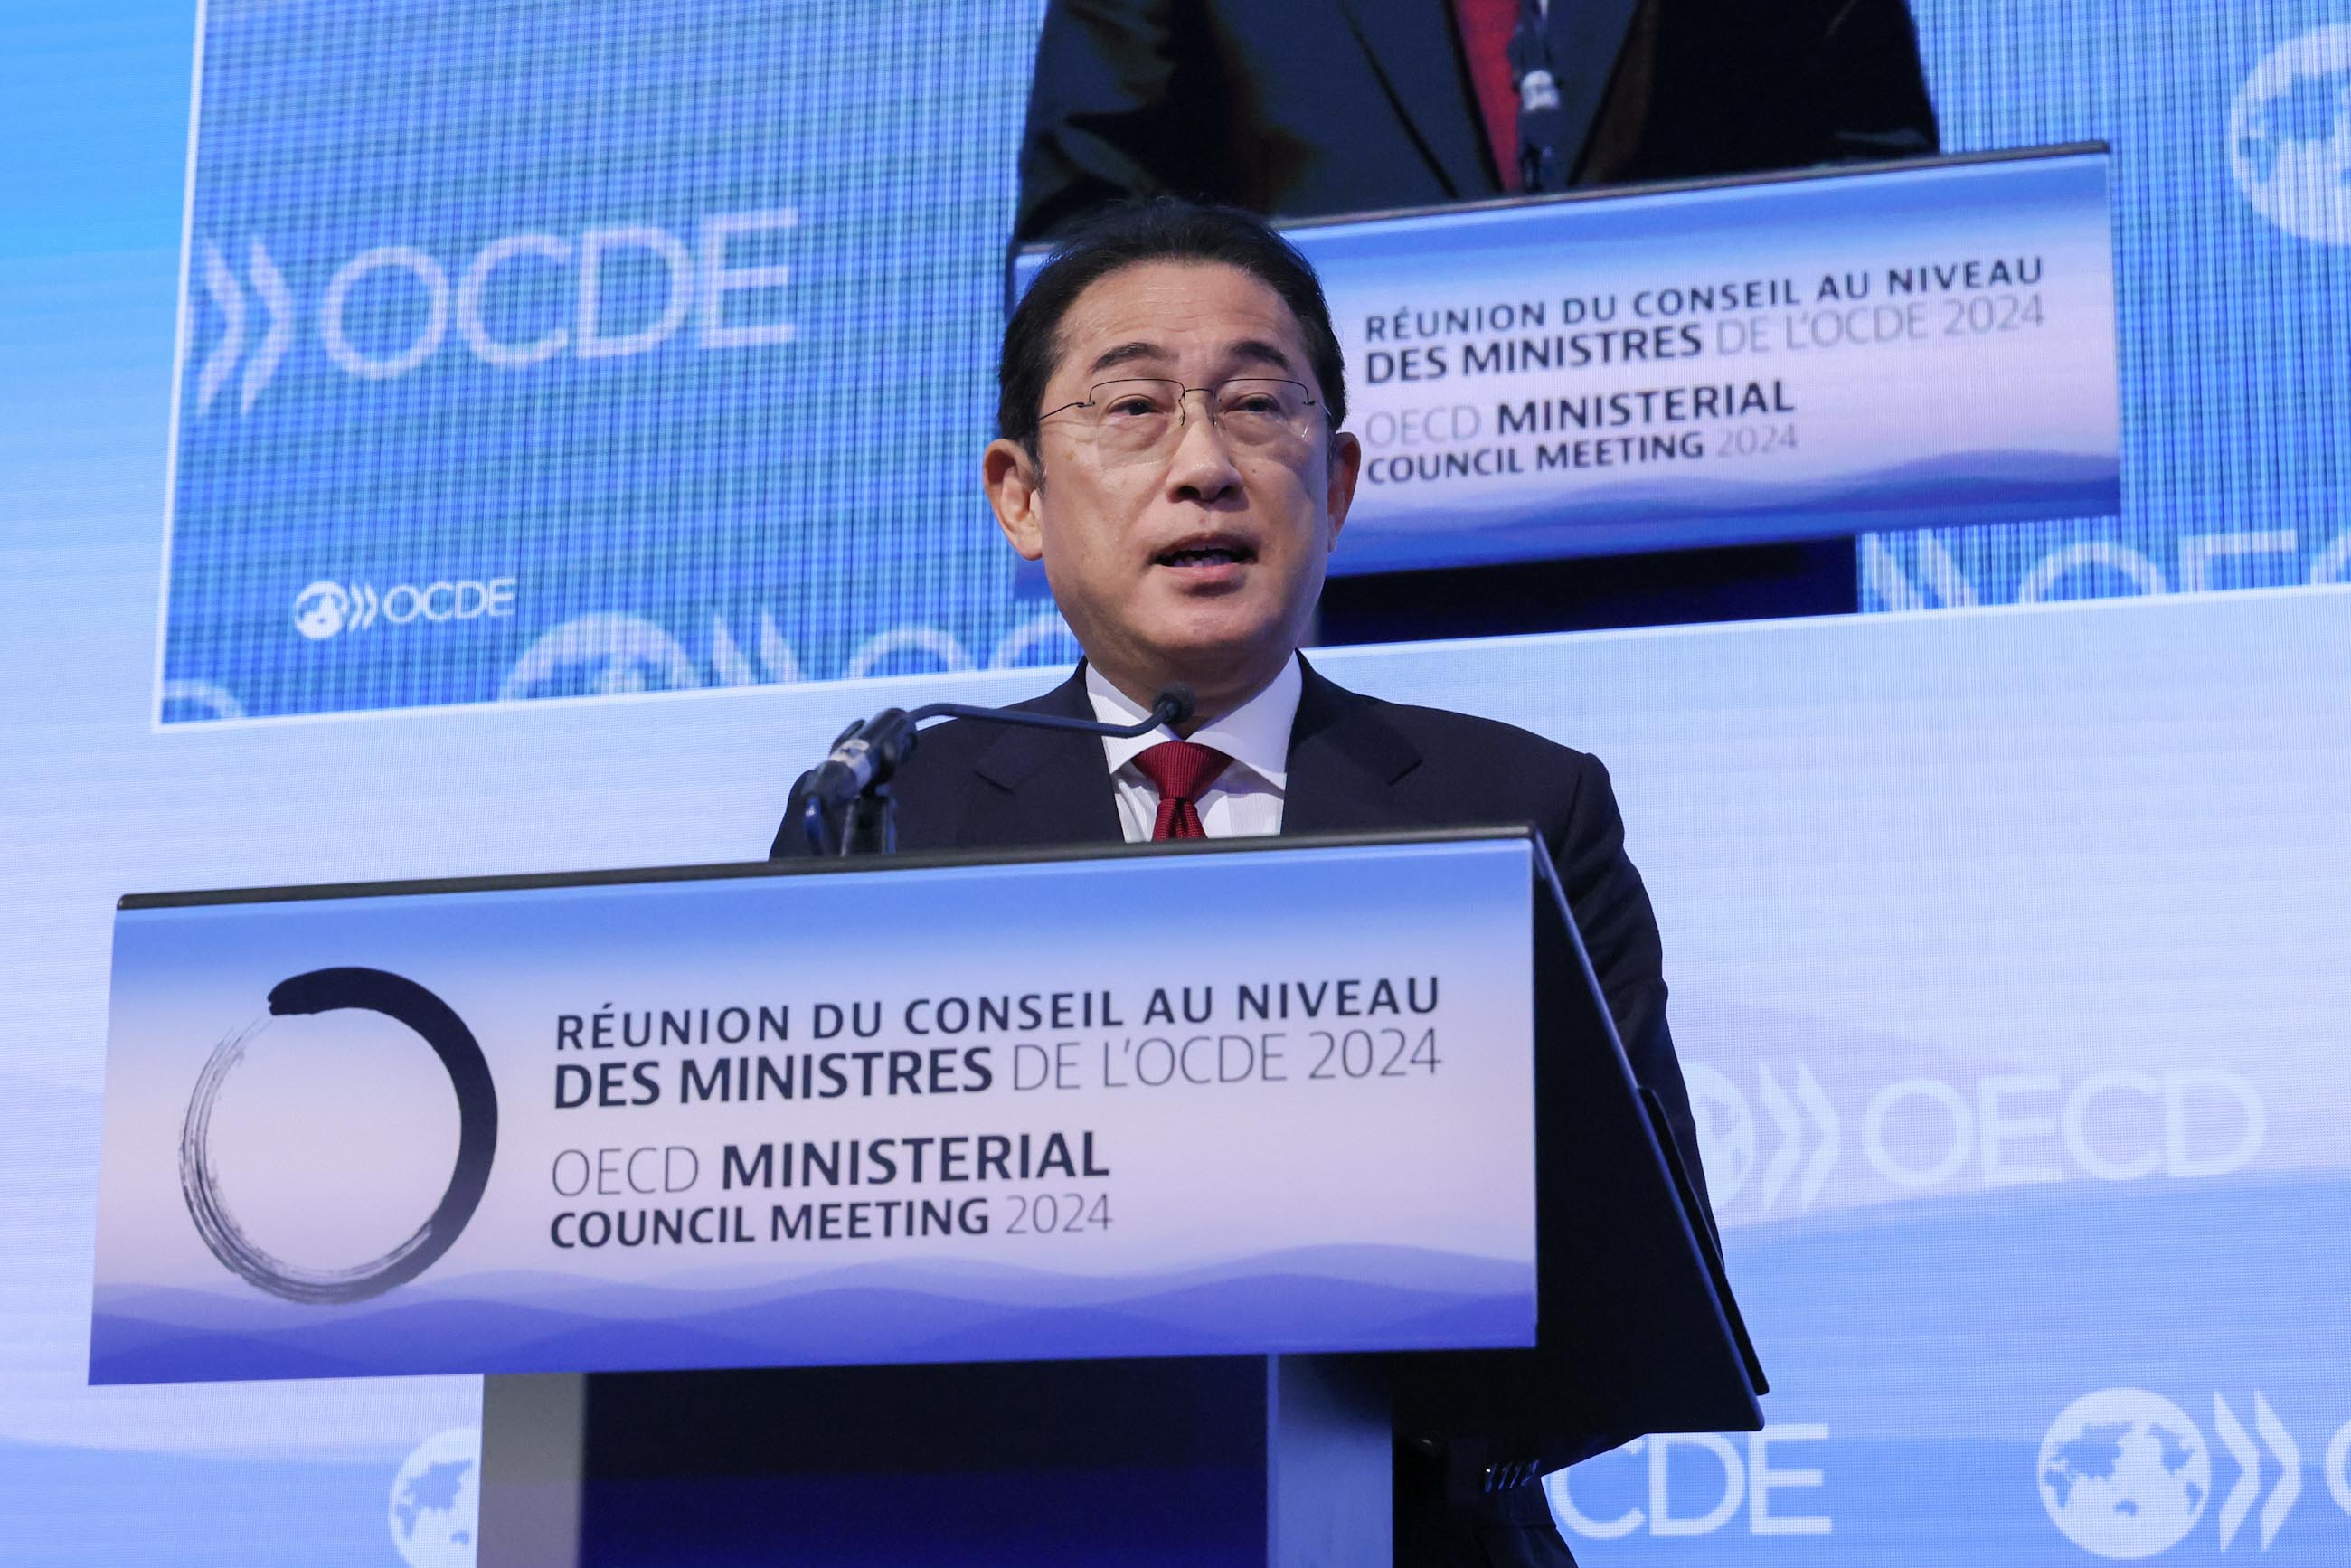 Prime Minister Kishida delivering a keynote speech at the Opening Ceremony of the Ministerial Council Meeting of OECD (1)